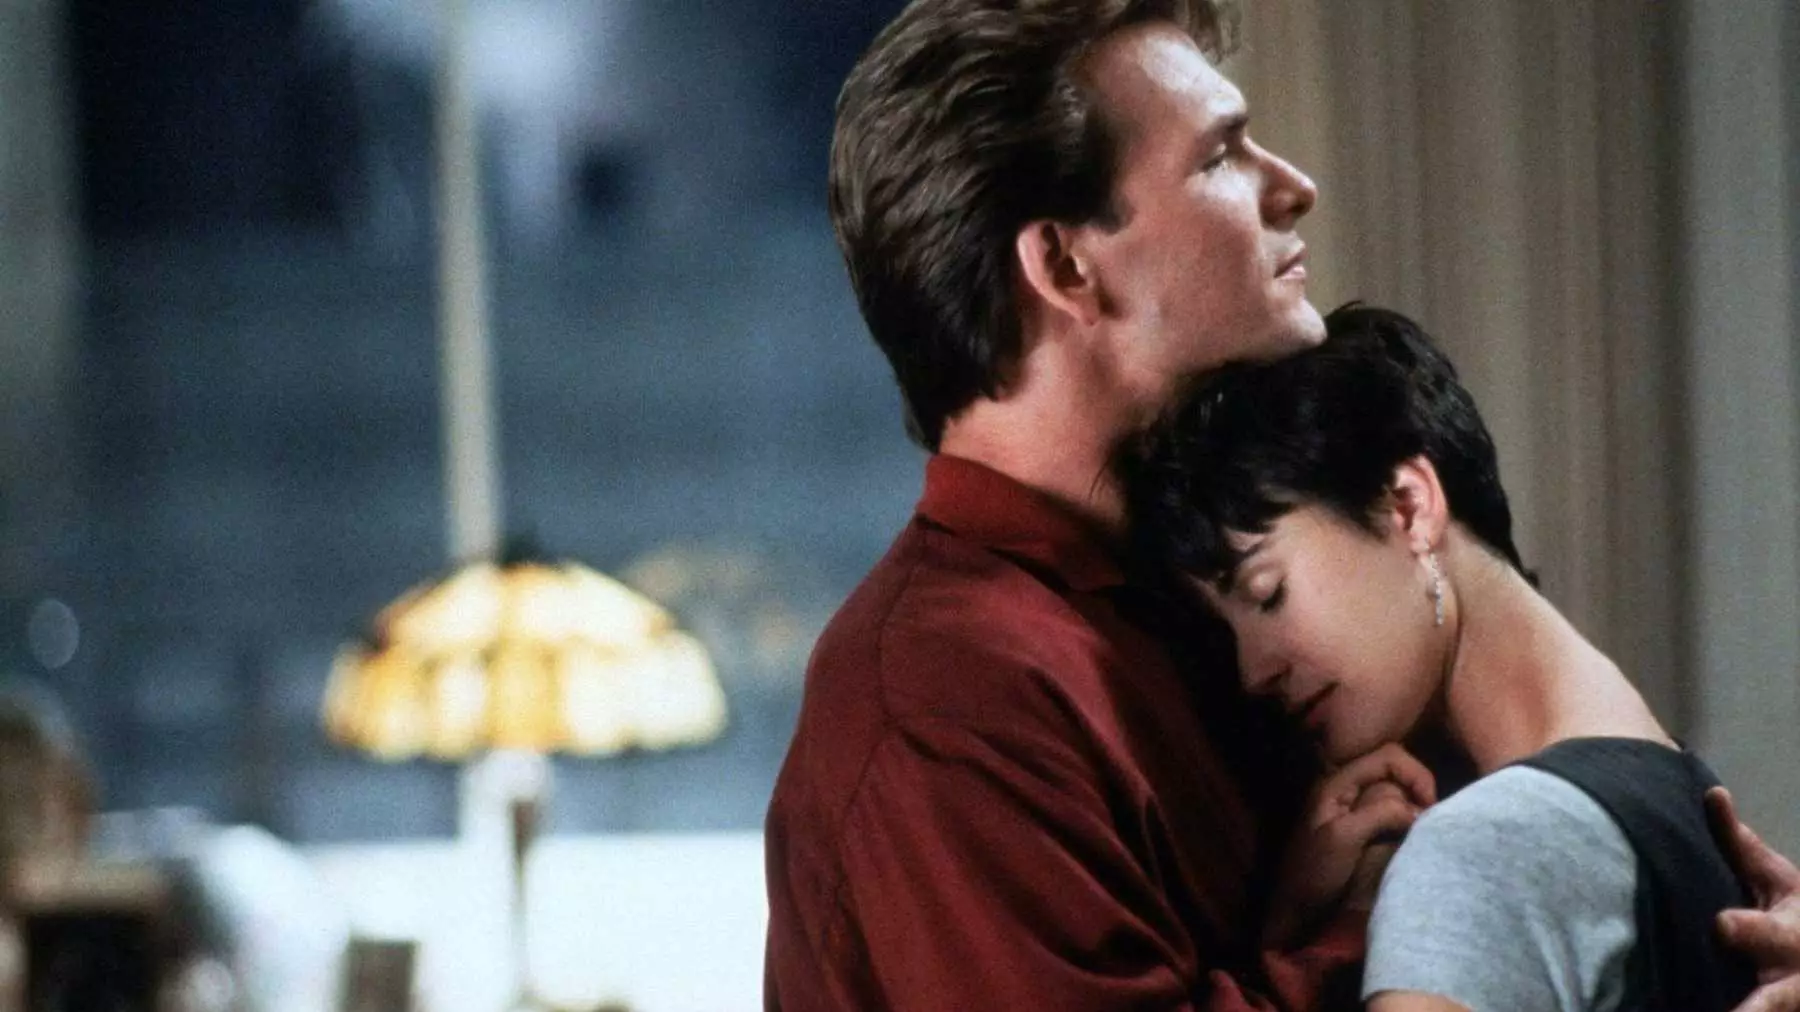 Patrick Swayze and Demi Moore star as Sam and Molly (